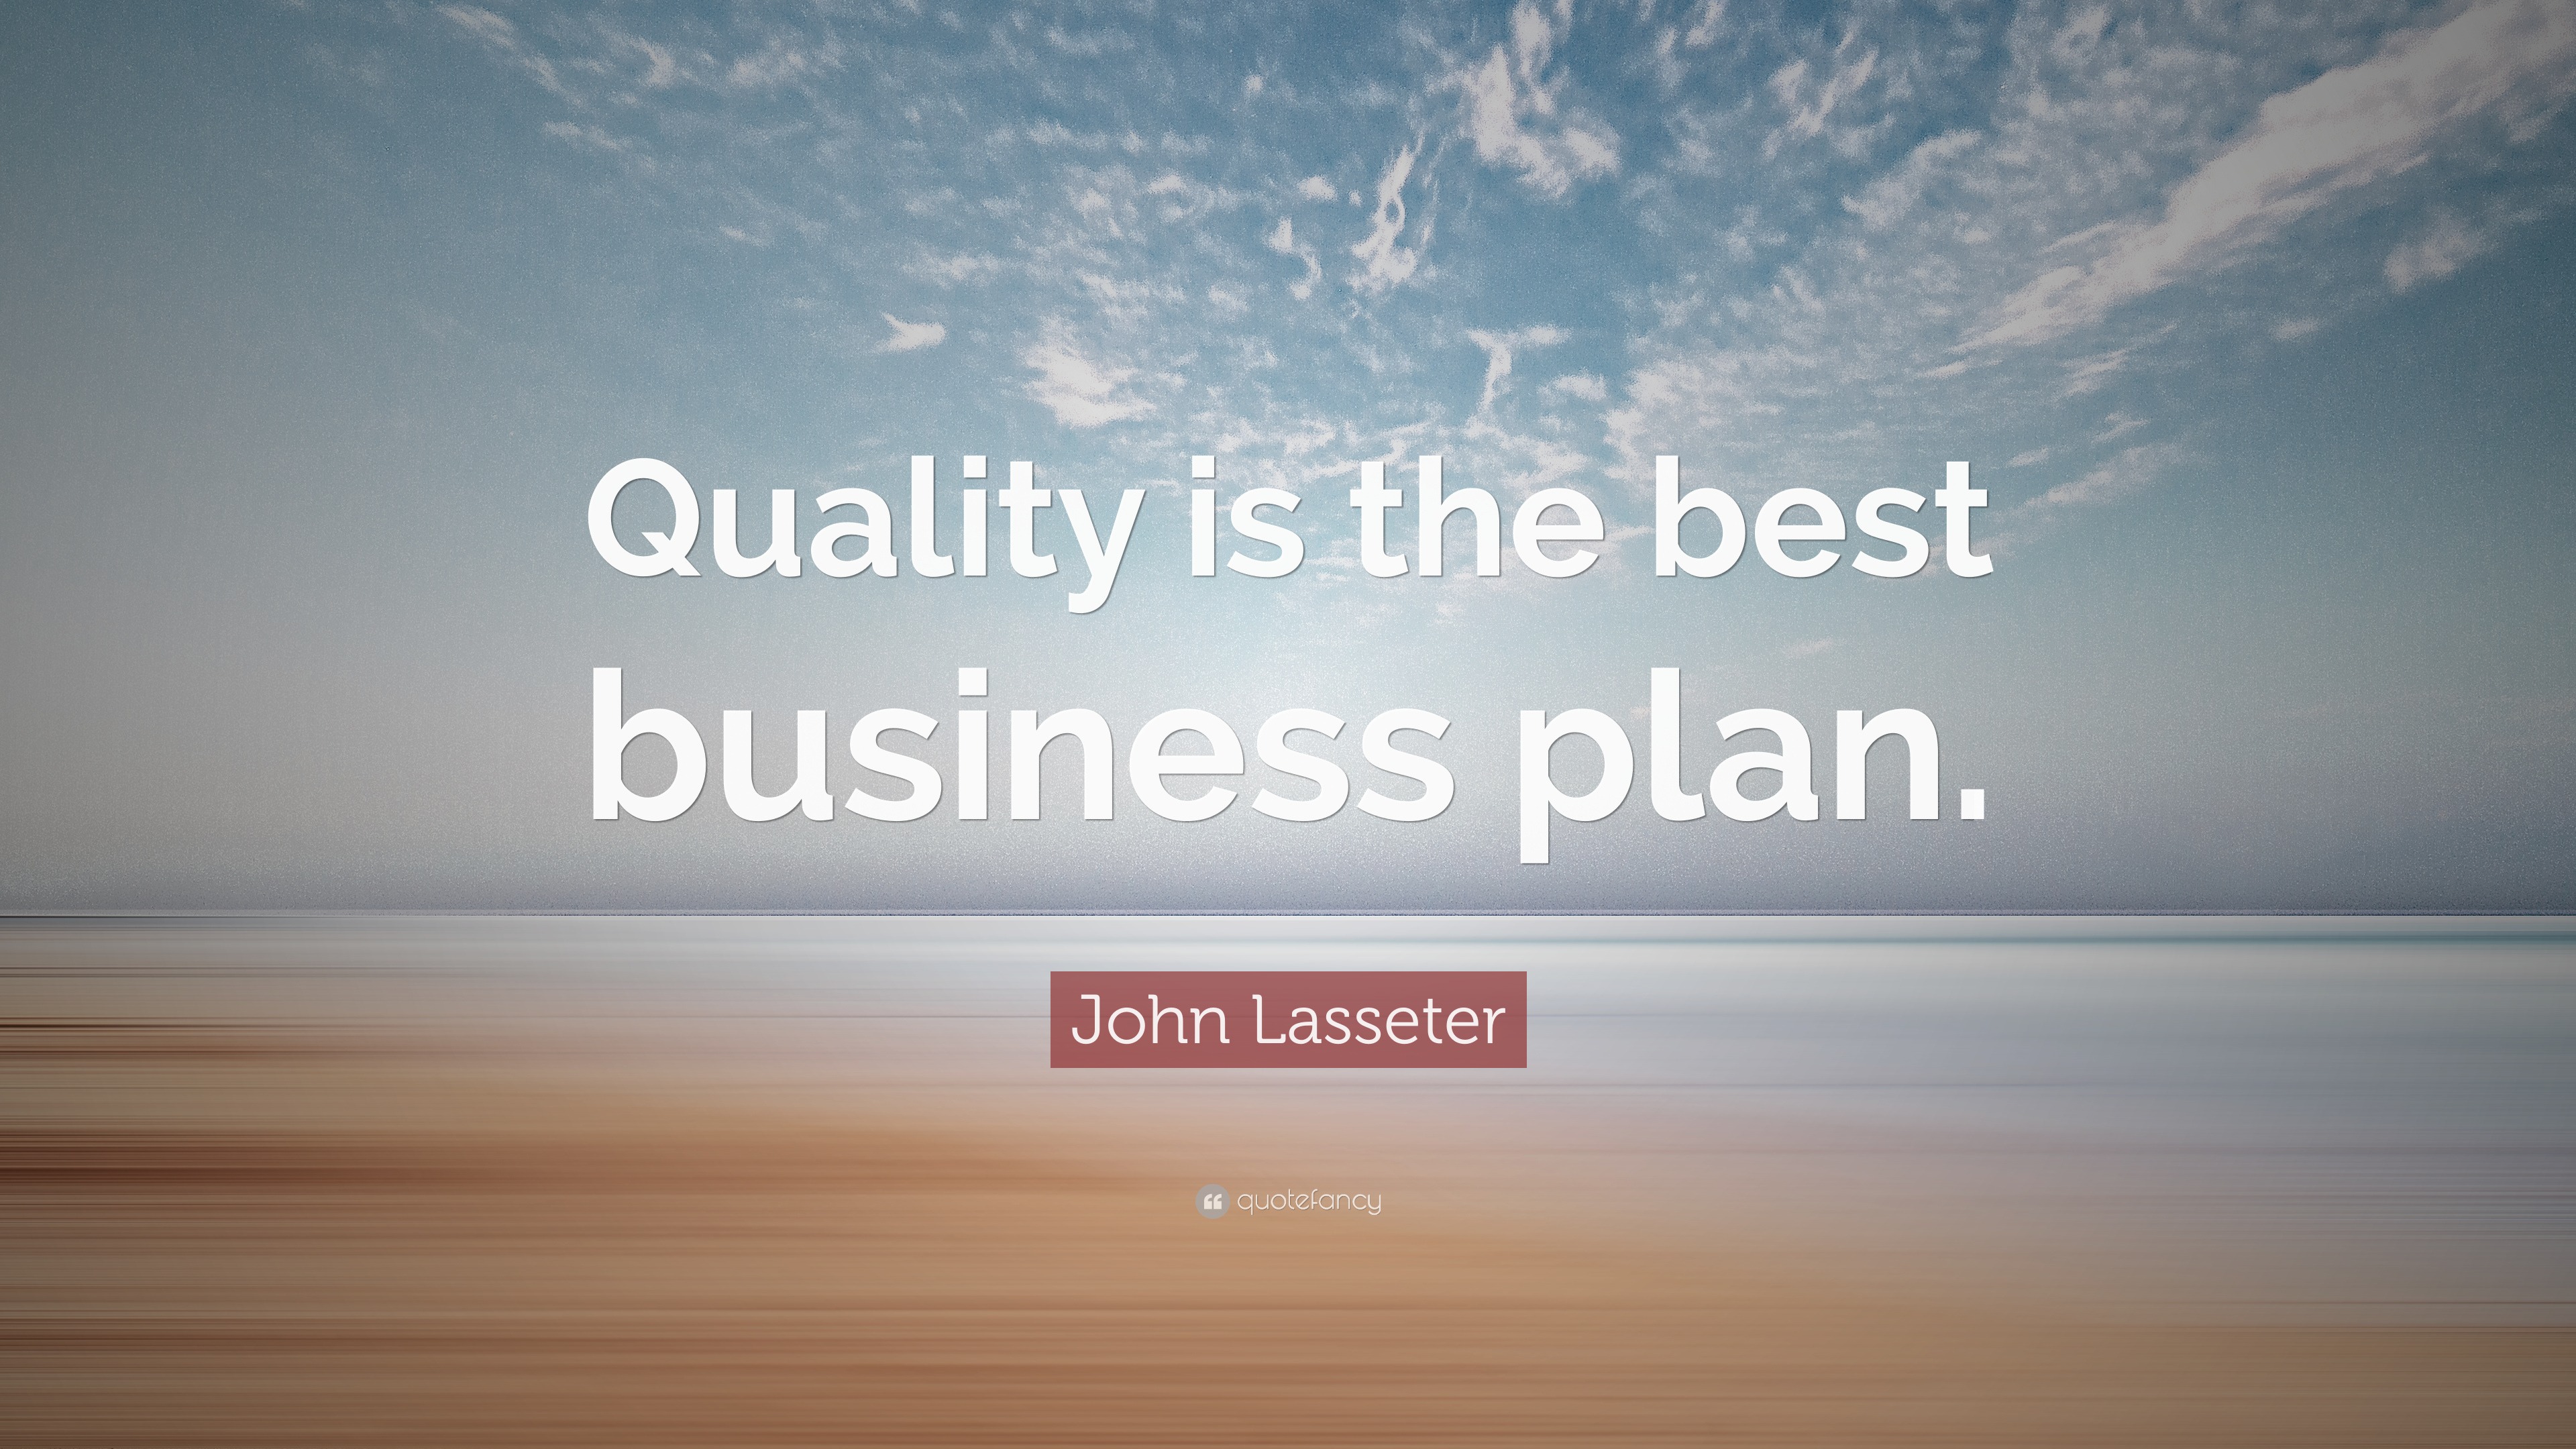 who said quality is the best business plan